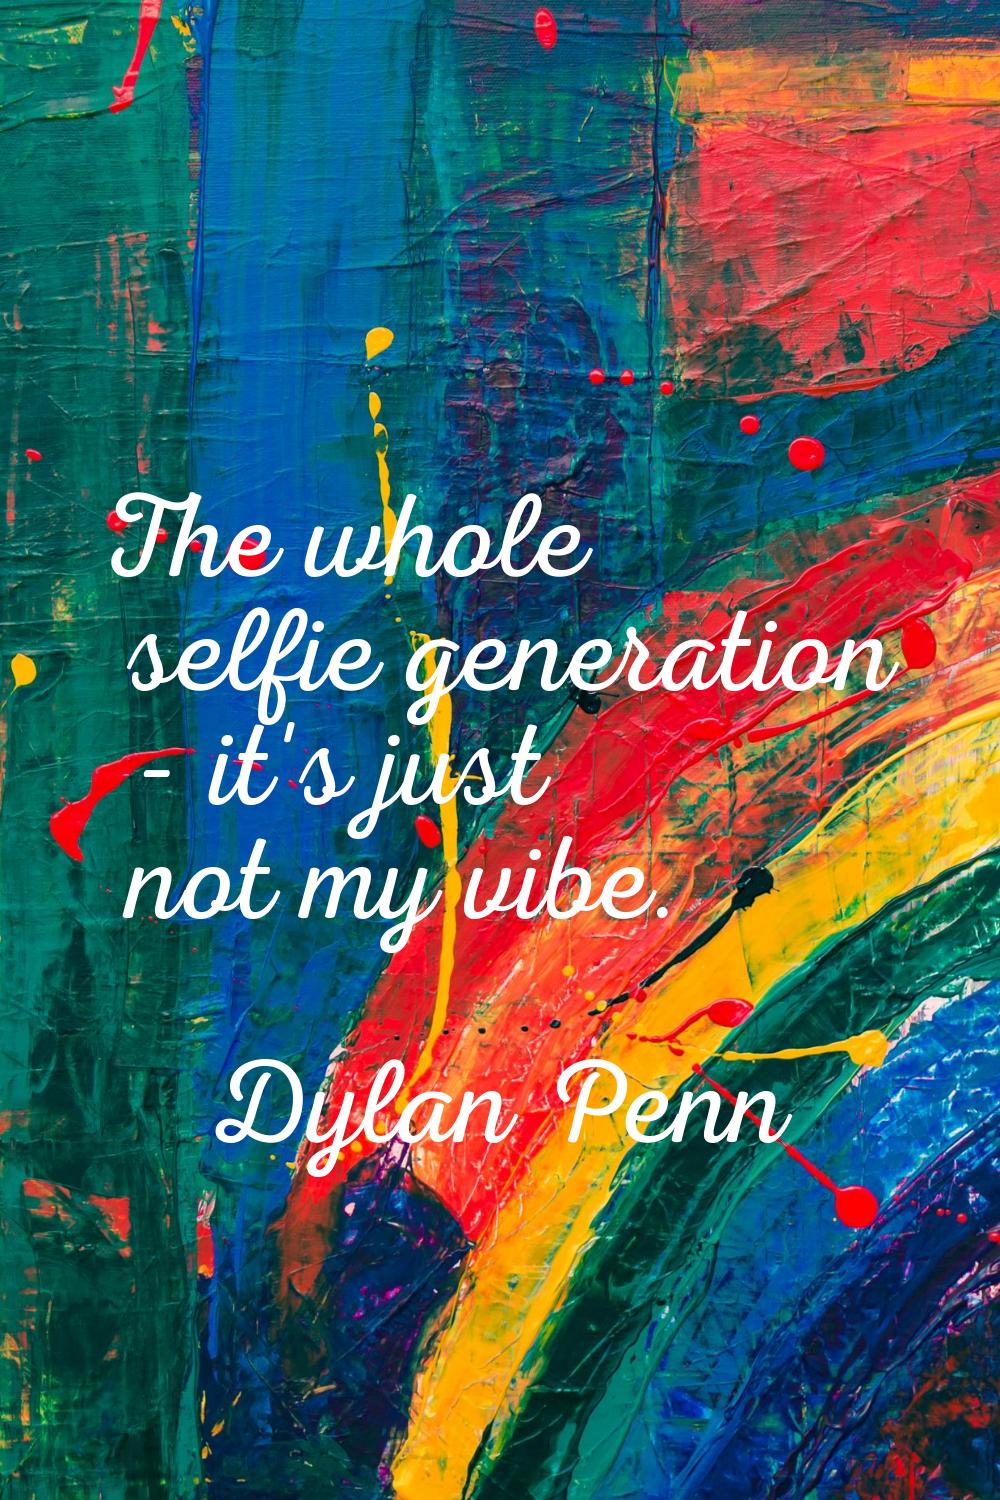 The whole selfie generation - it's just not my vibe.